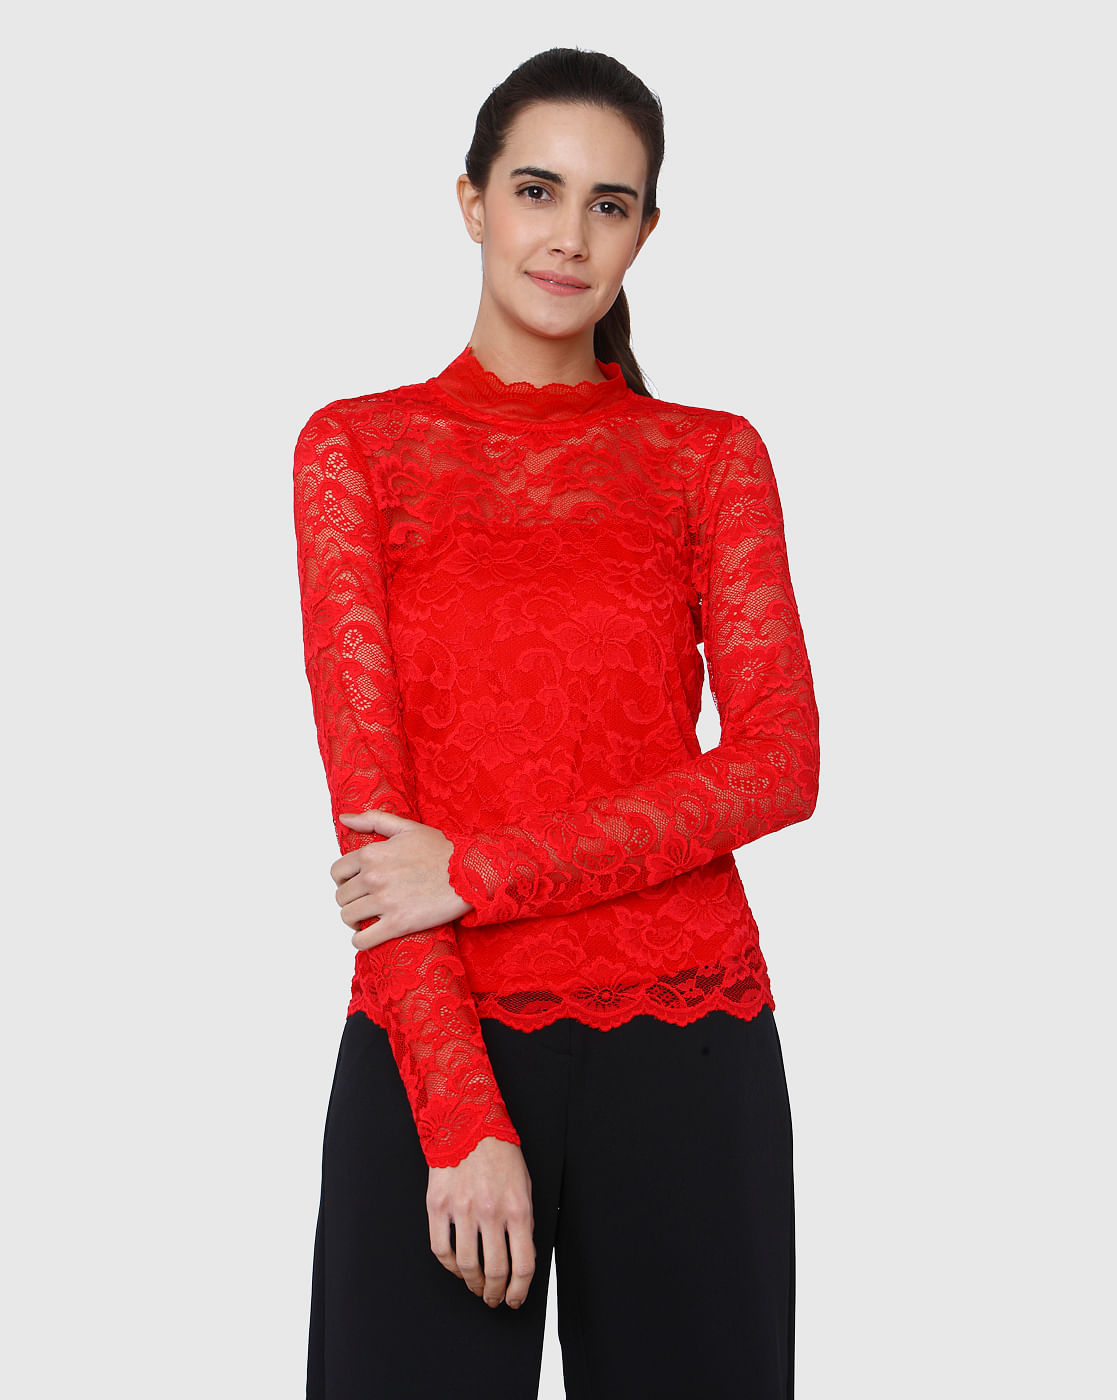 red lace high neck top